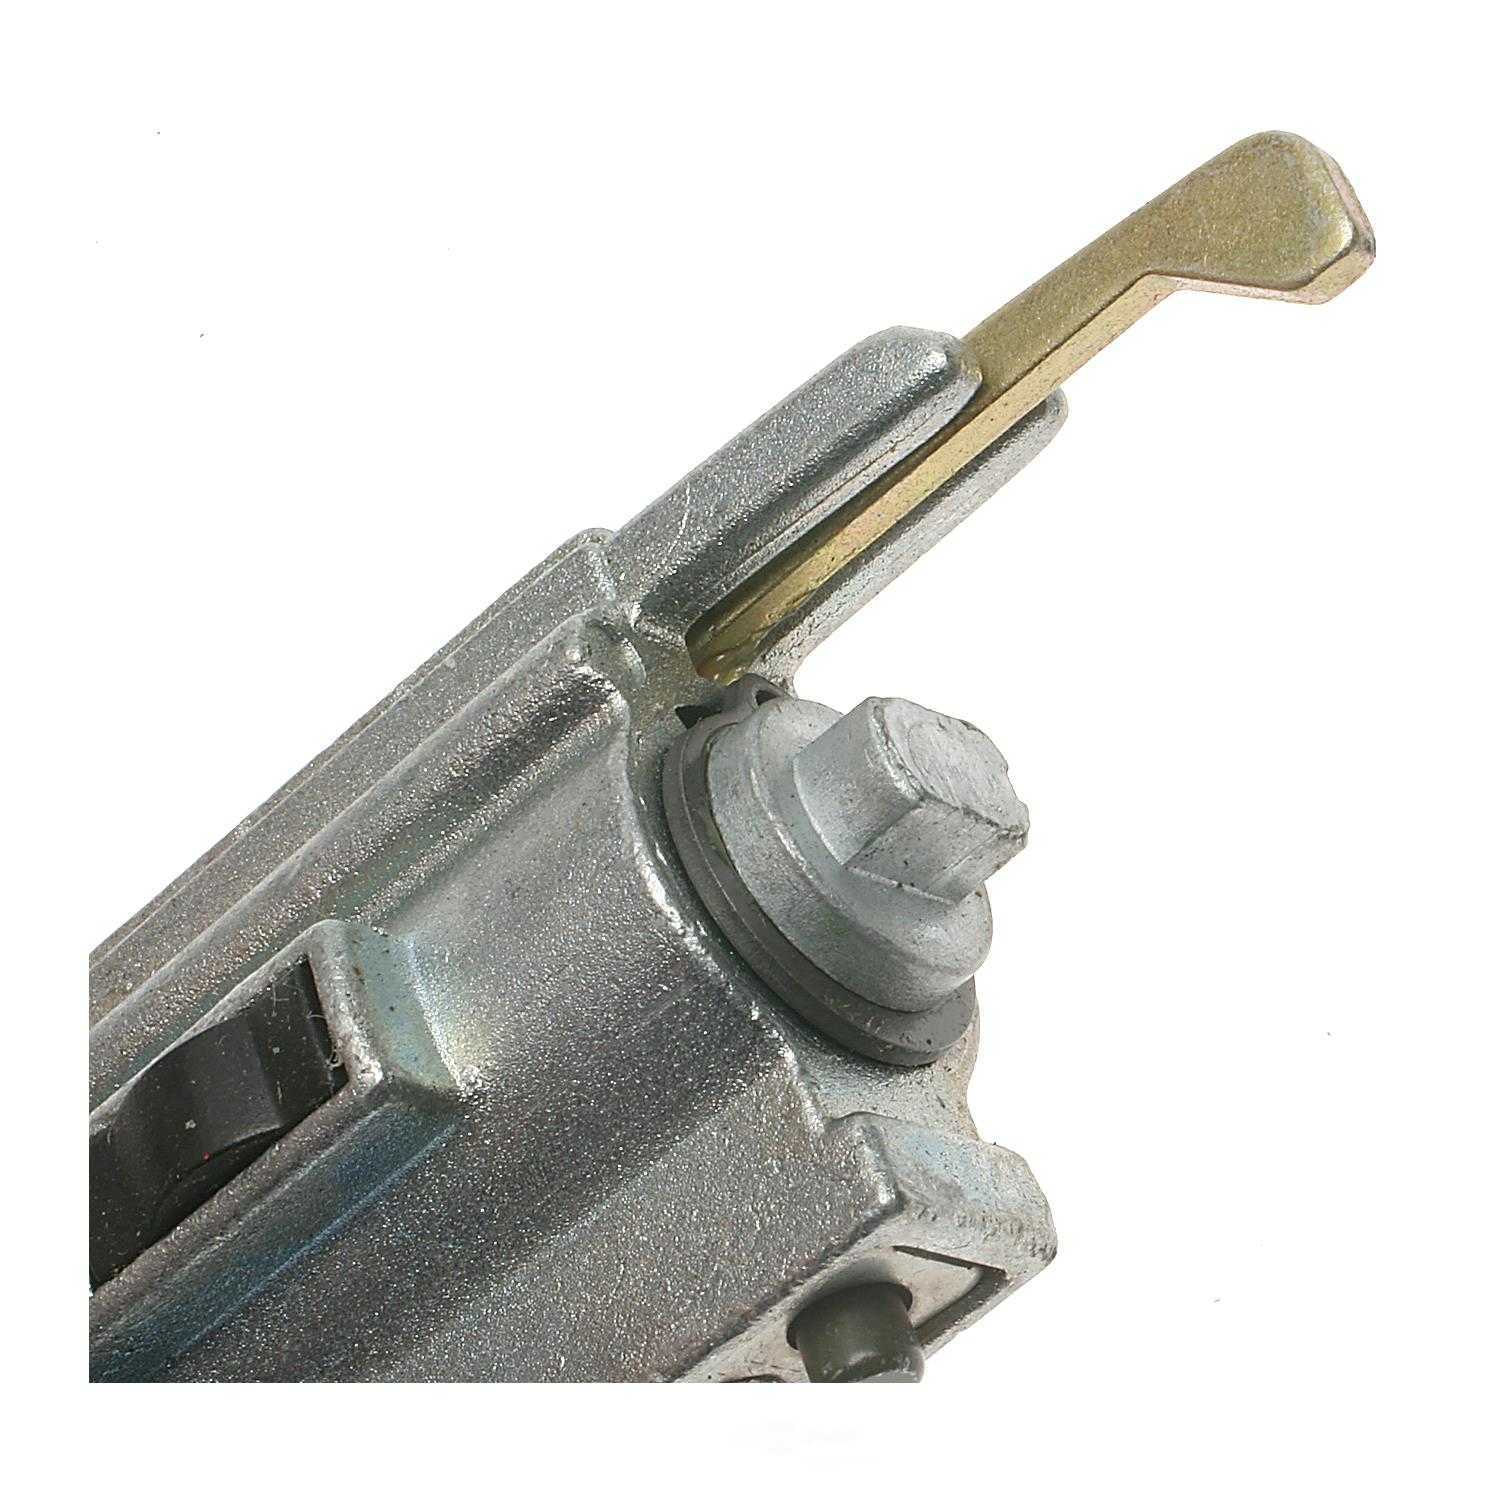 STANDARD MOTOR PRODUCTS - Ignition Lock Cylinder - STA US-245L